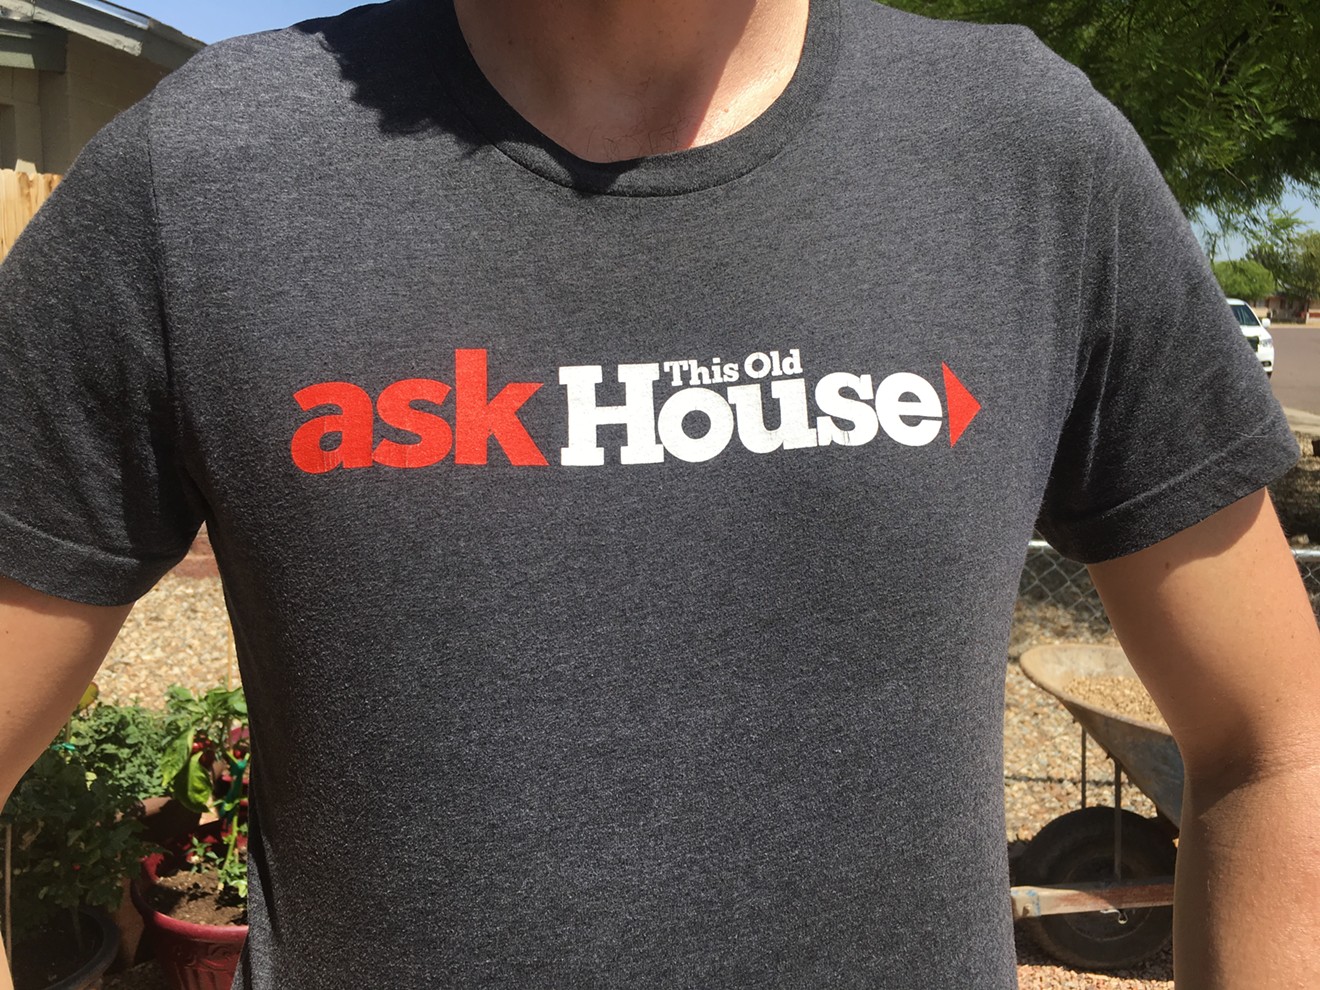 Ask This Old House is filming three episodes for its upcoming season in the Phoenix metropolitan area.